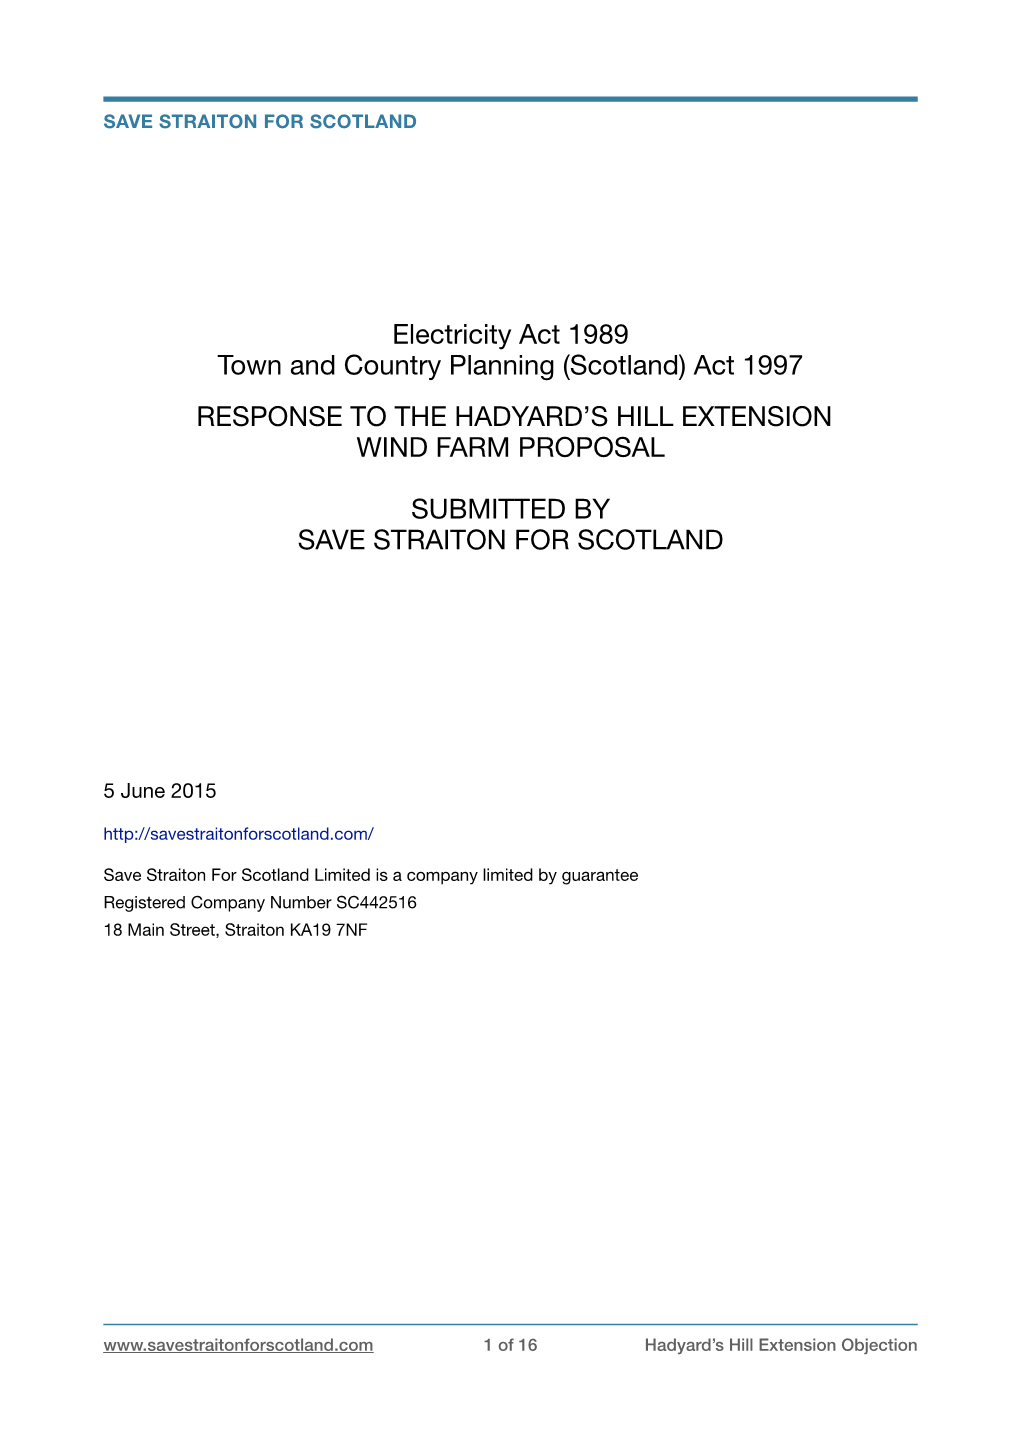 Ssfs Response to Hadyard's Hill Extension Proposal